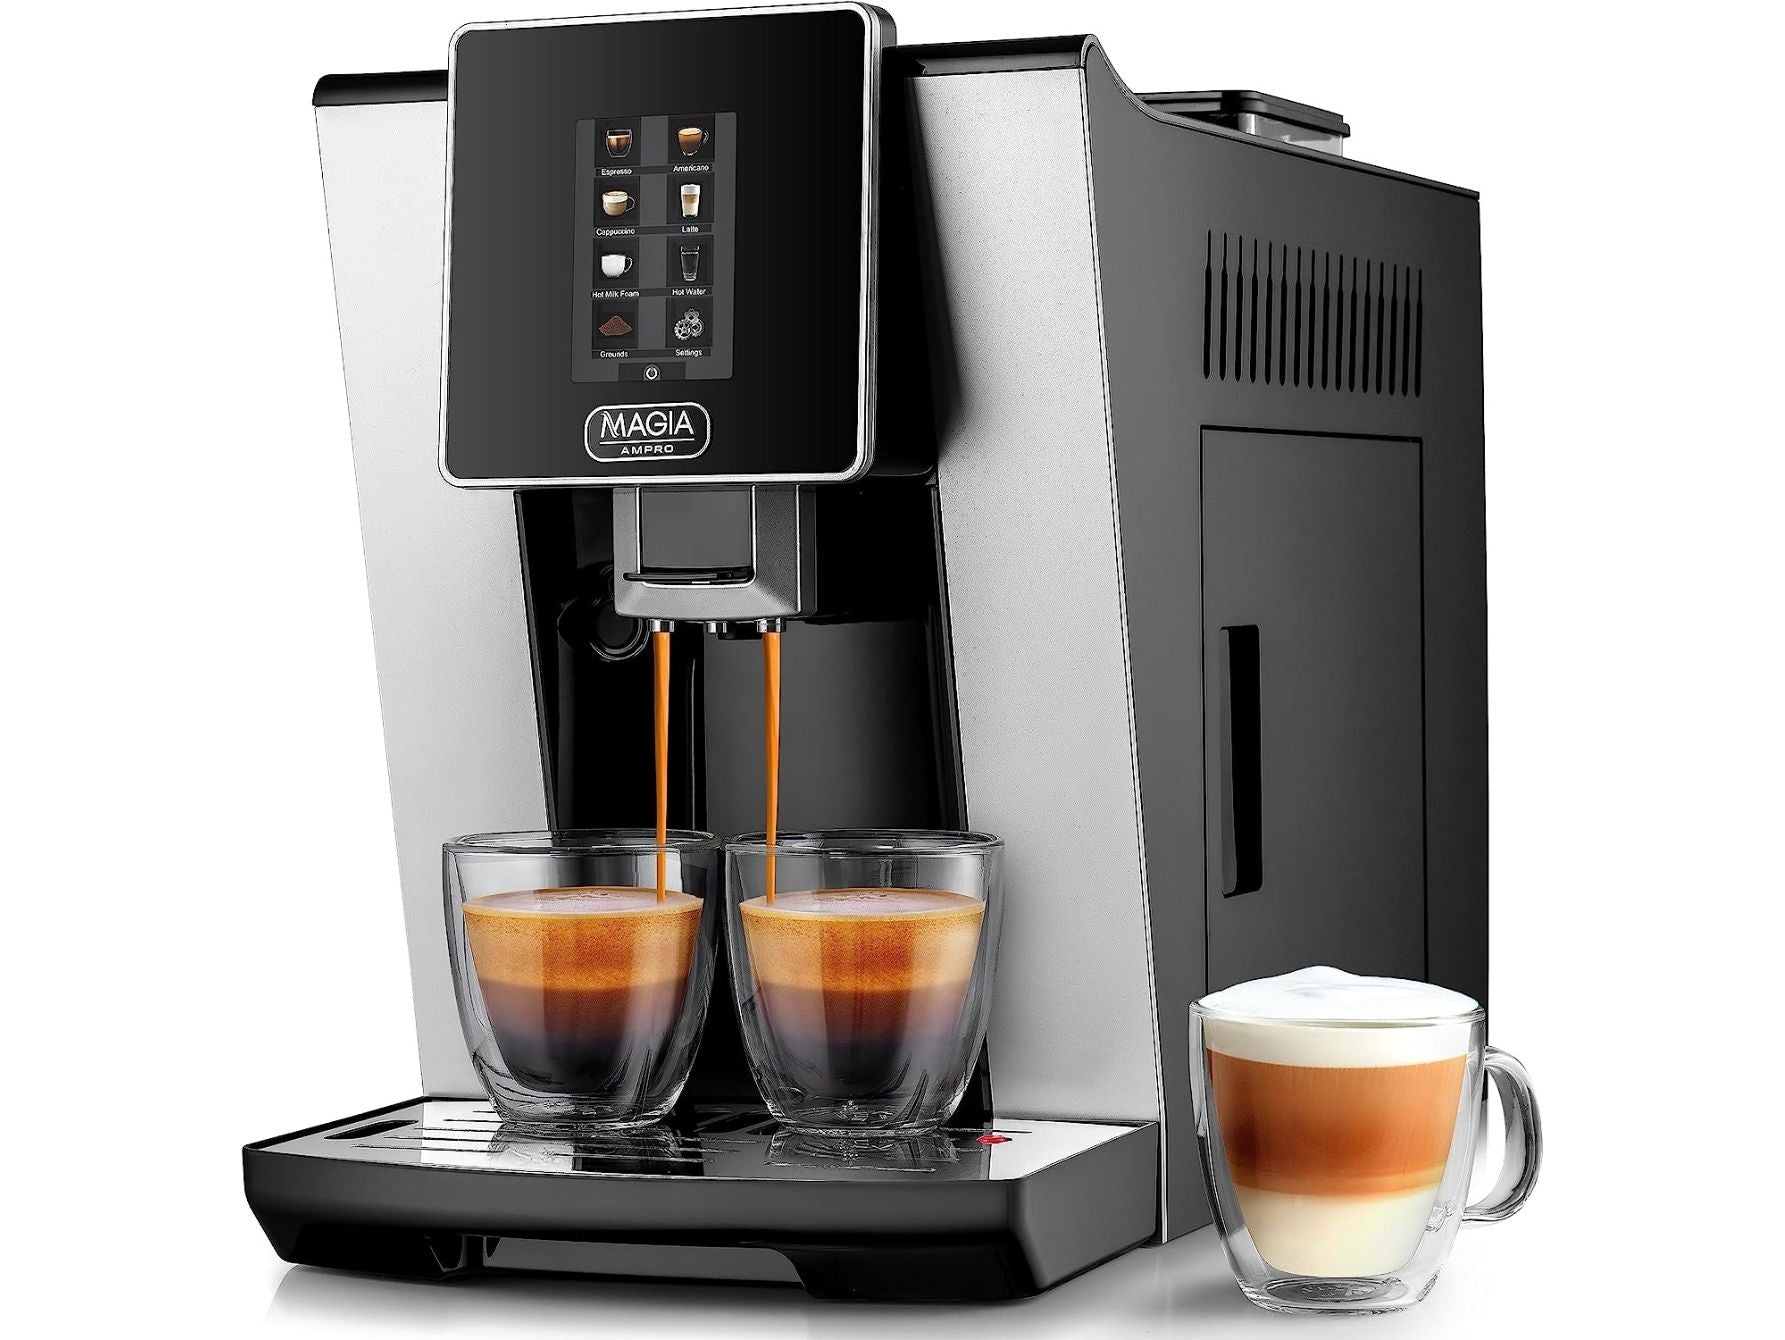 Fully automatic coffee machines